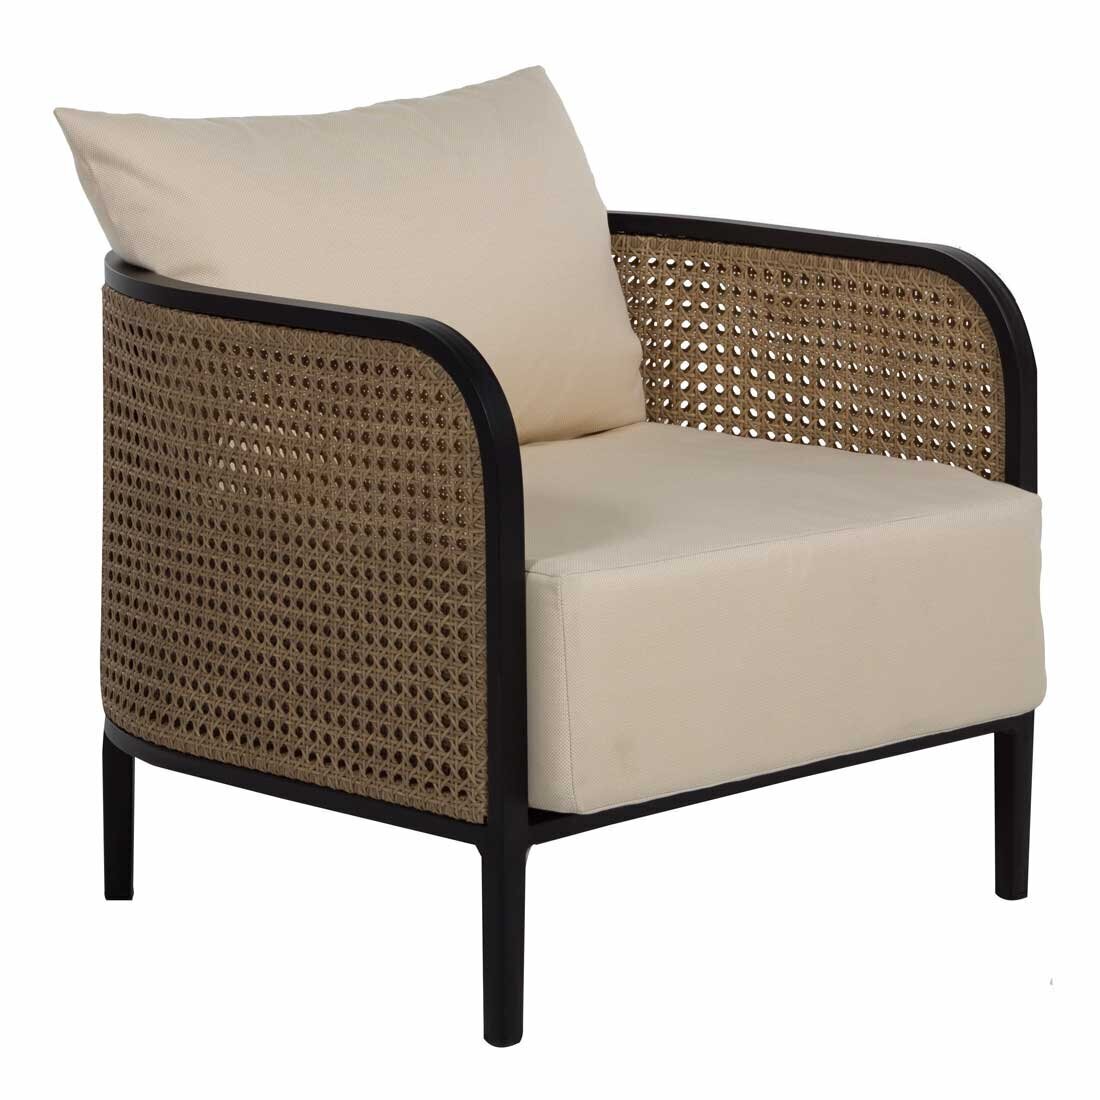 Rattan Armchair for Outdoors